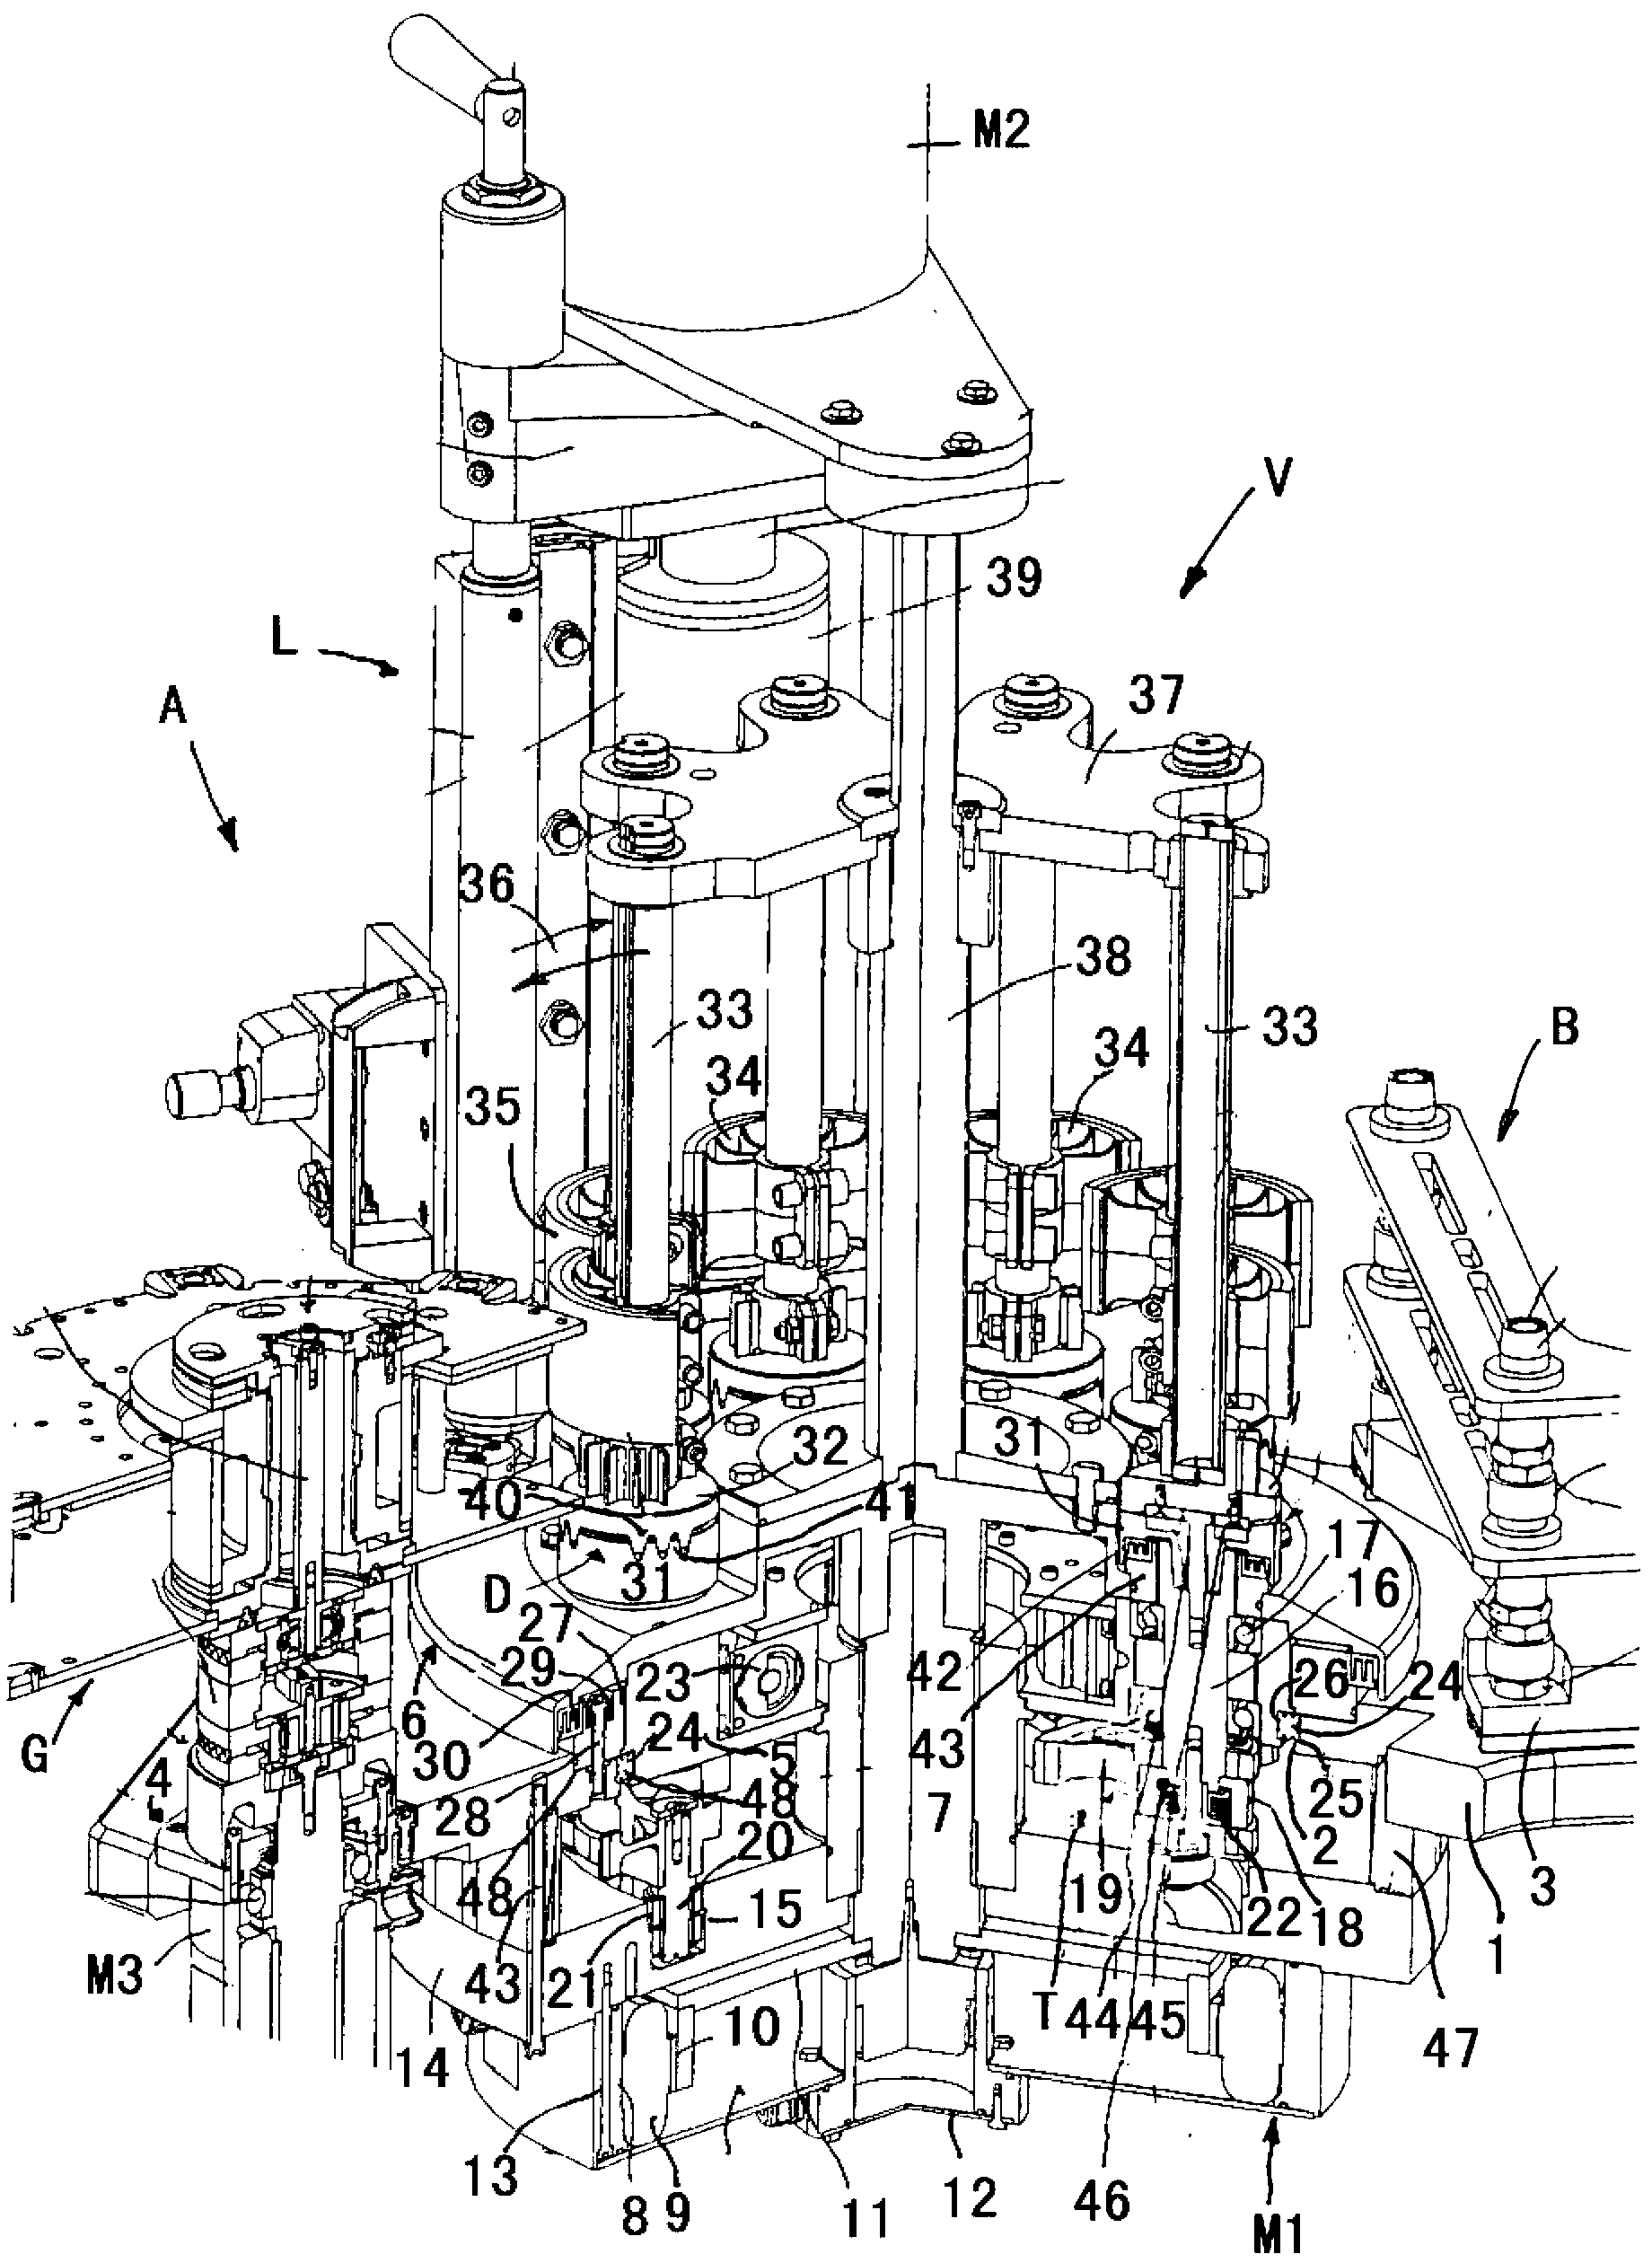 Device for transferring fitting pieces for container labelling